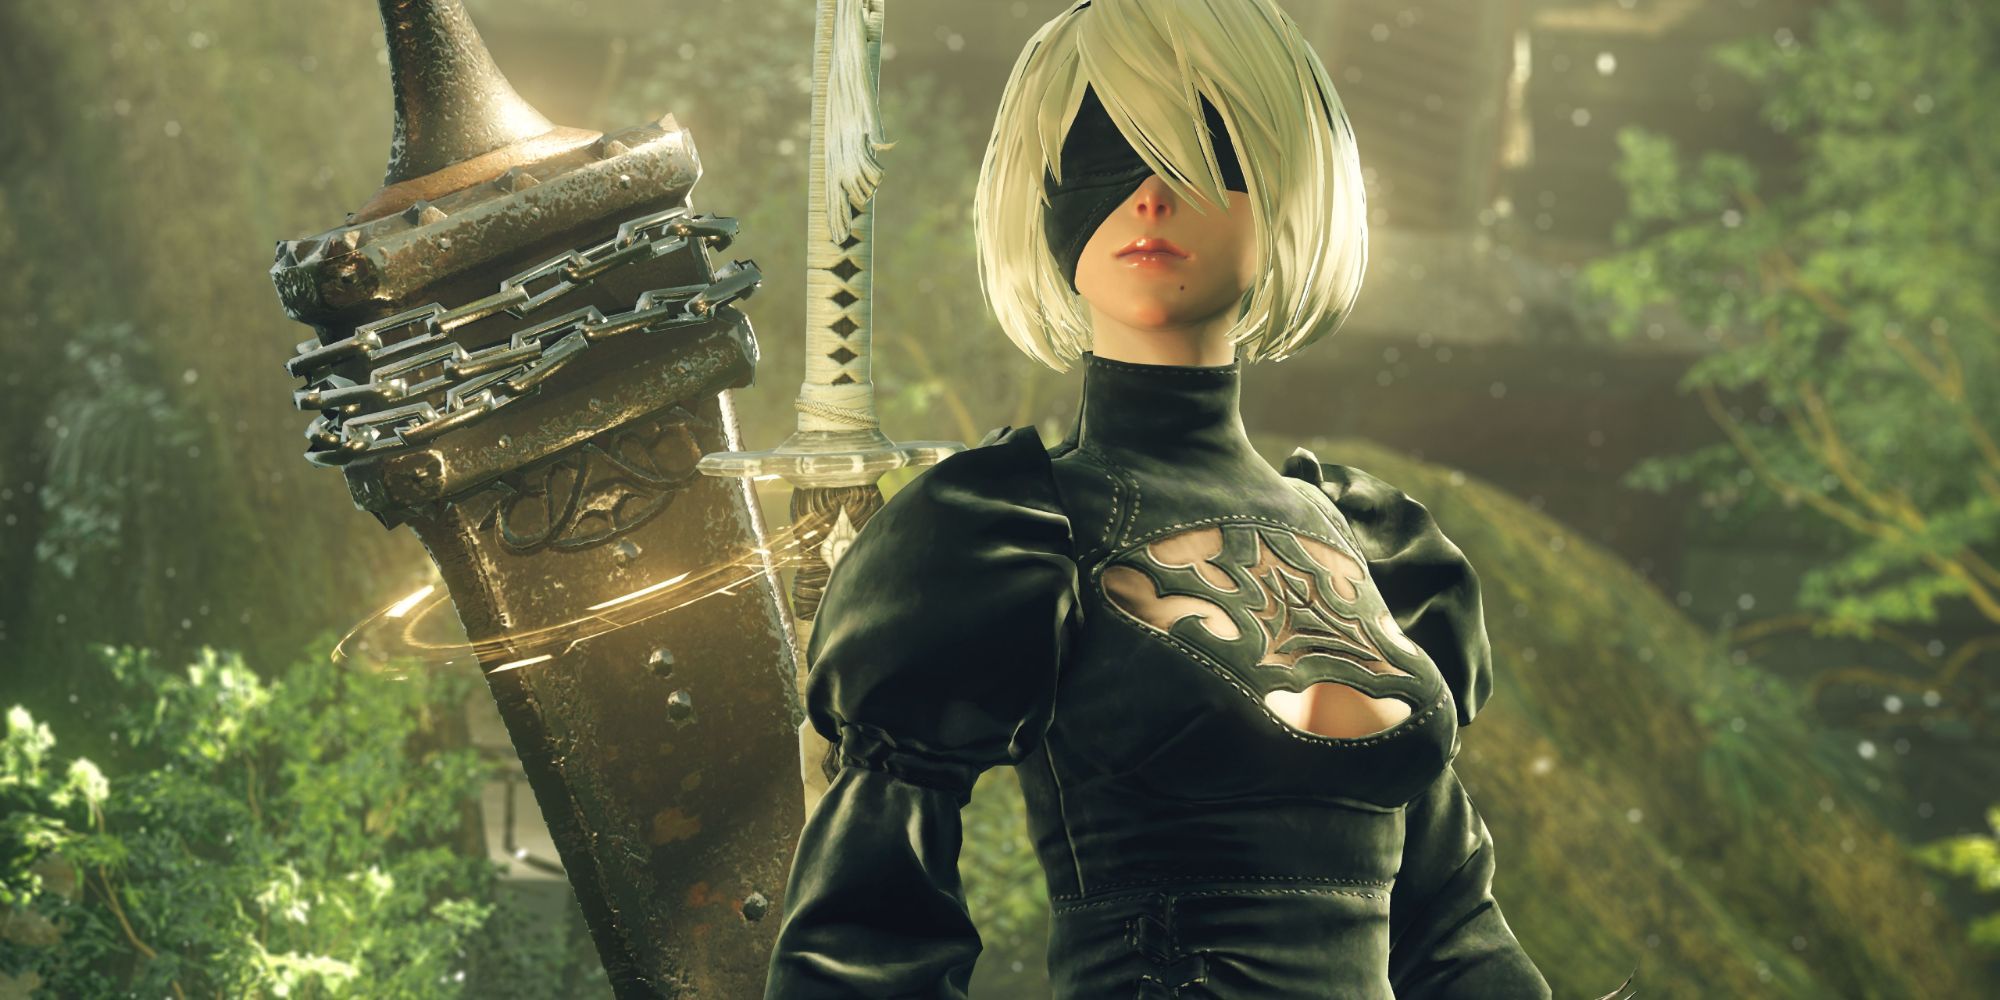 image from the game NieR Automata featuring the protagonist 2B with a weapon and iconic eyepatch